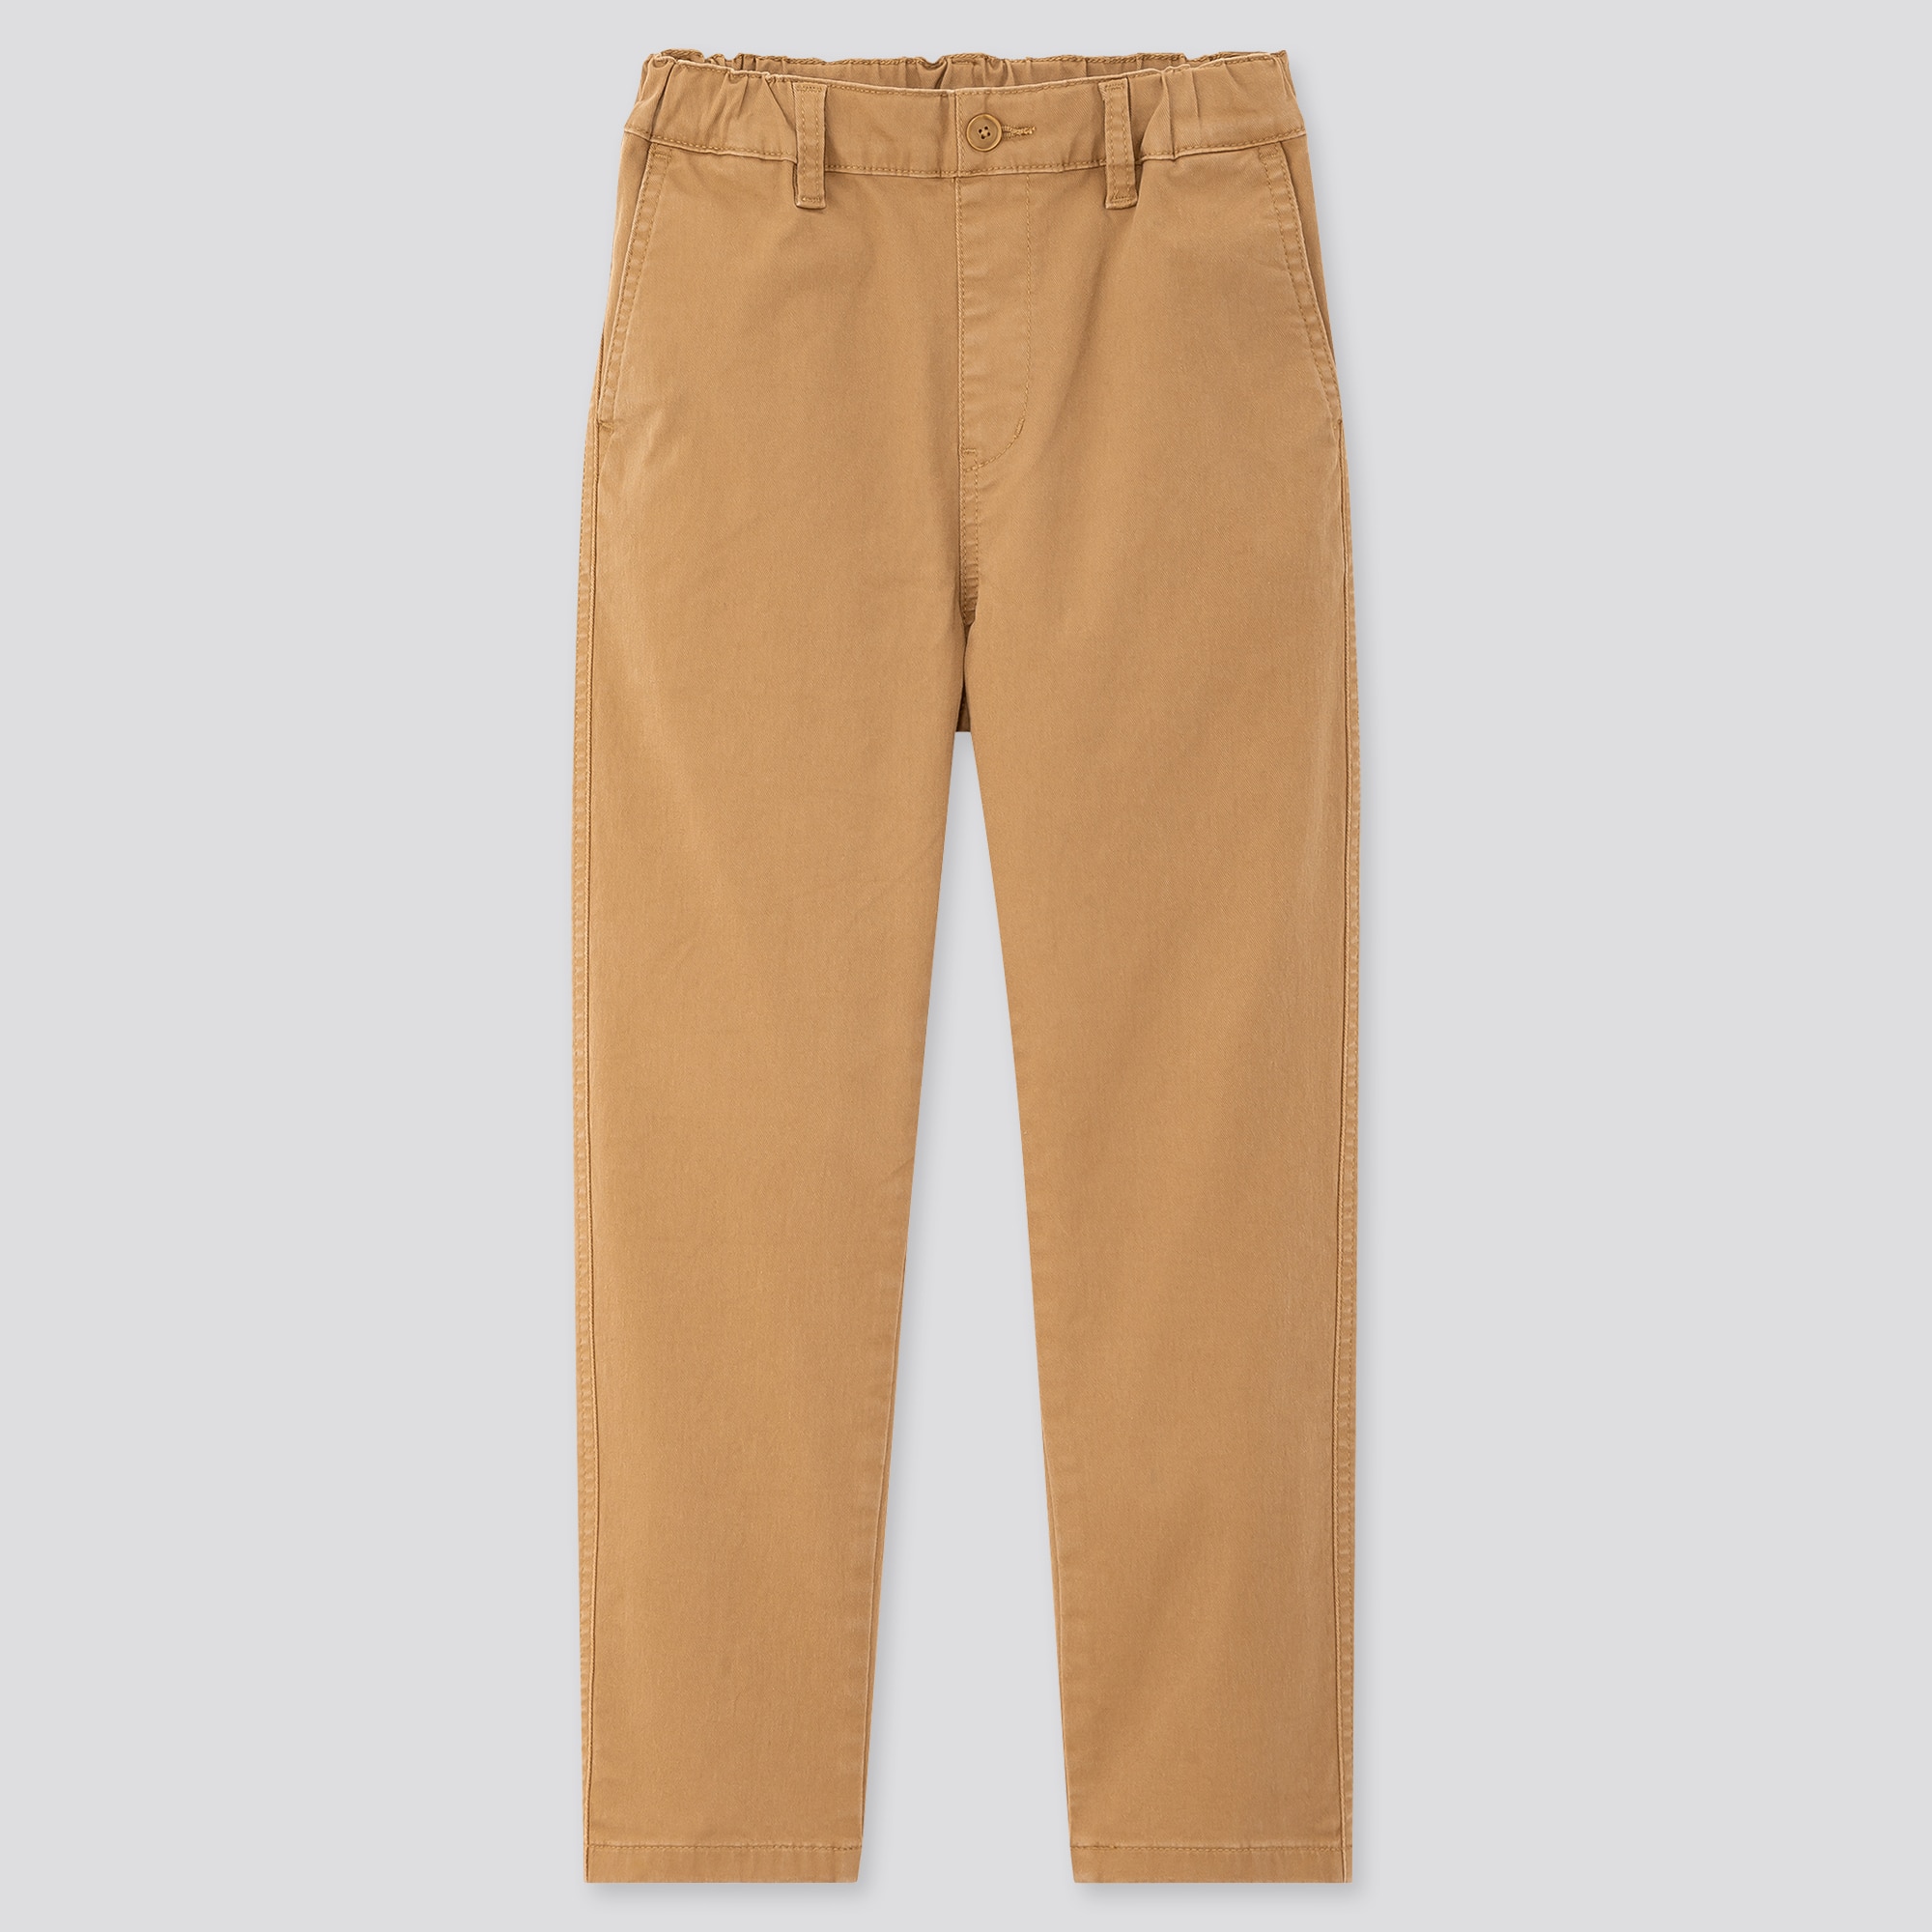 white chino pants for toddlers